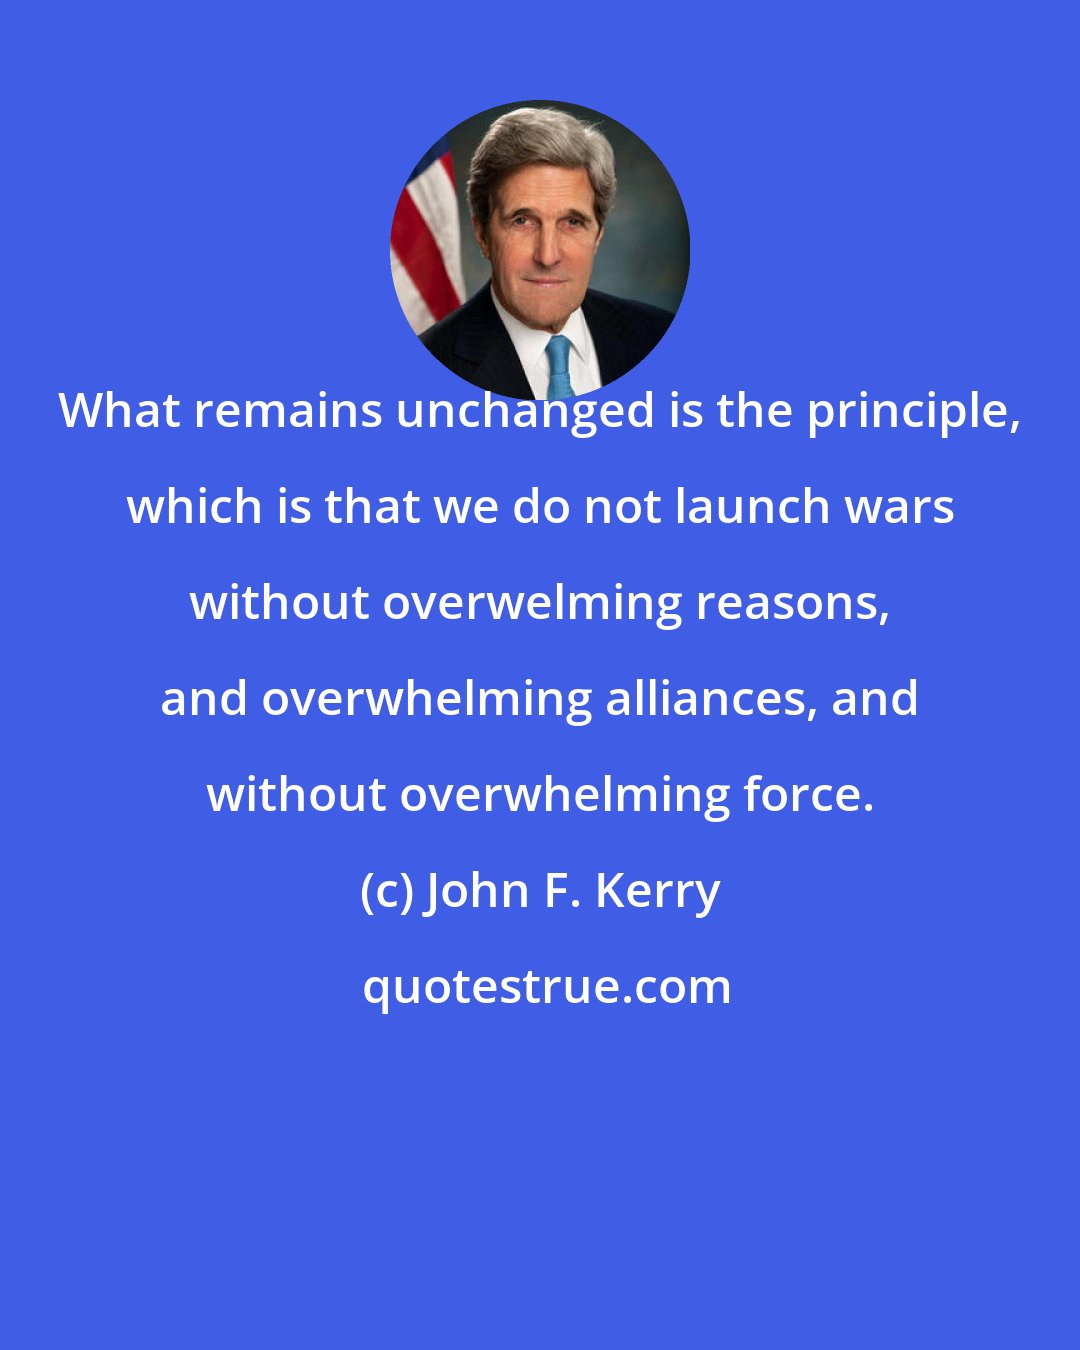 John F. Kerry: What remains unchanged is the principle, which is that we do not launch wars without overwelming reasons, and overwhelming alliances, and without overwhelming force.